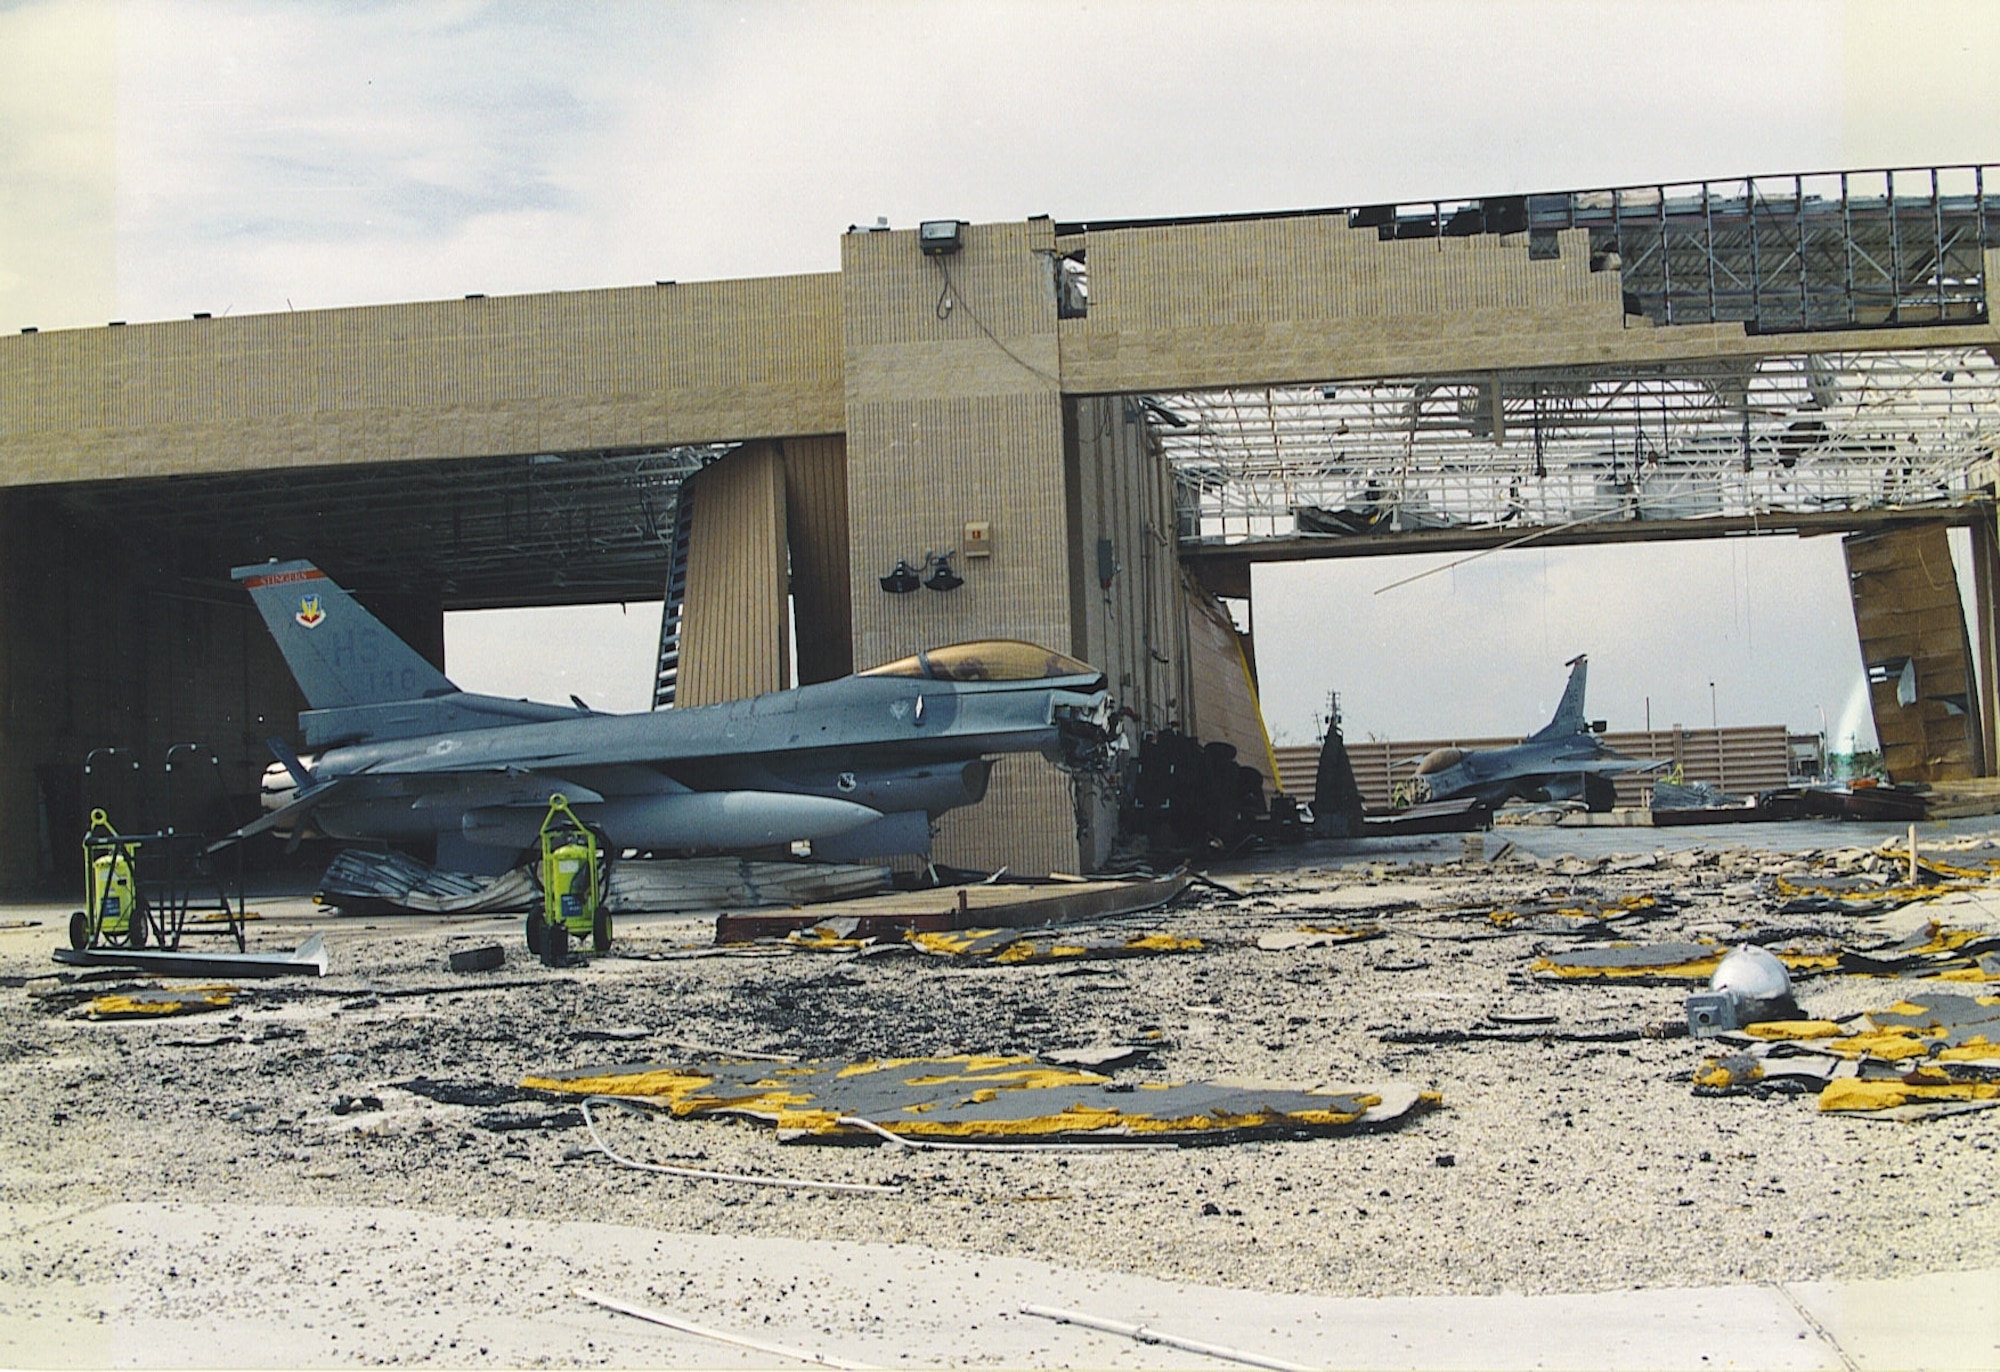 Destruction of Homestead Air Force Base after Hurricane Andrew. (U.S. Air Force photo)